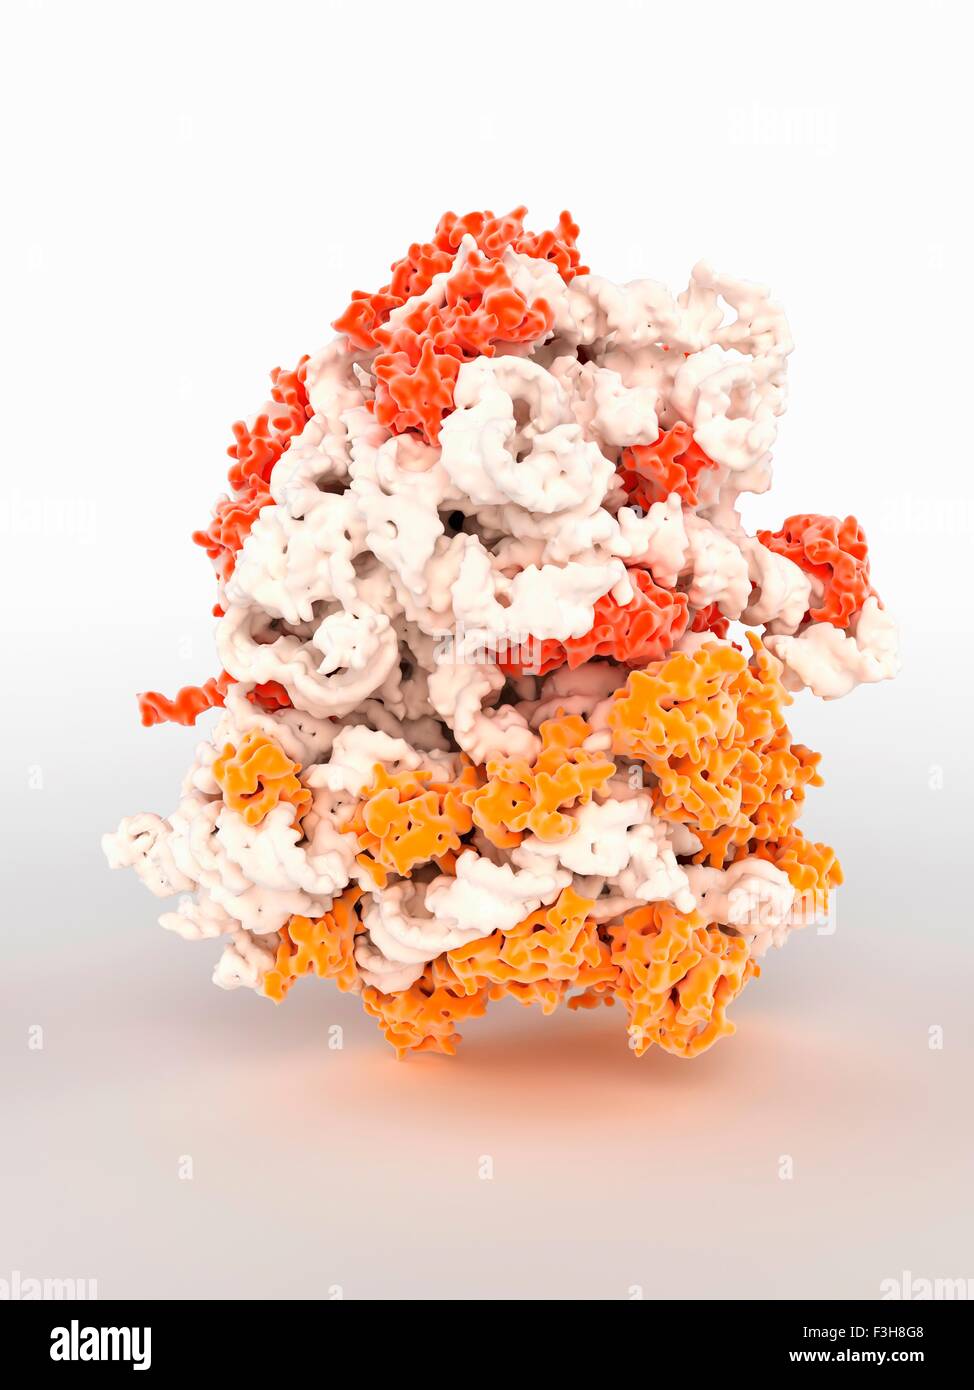 3D computer graphic model of a ribosome Stock Photo